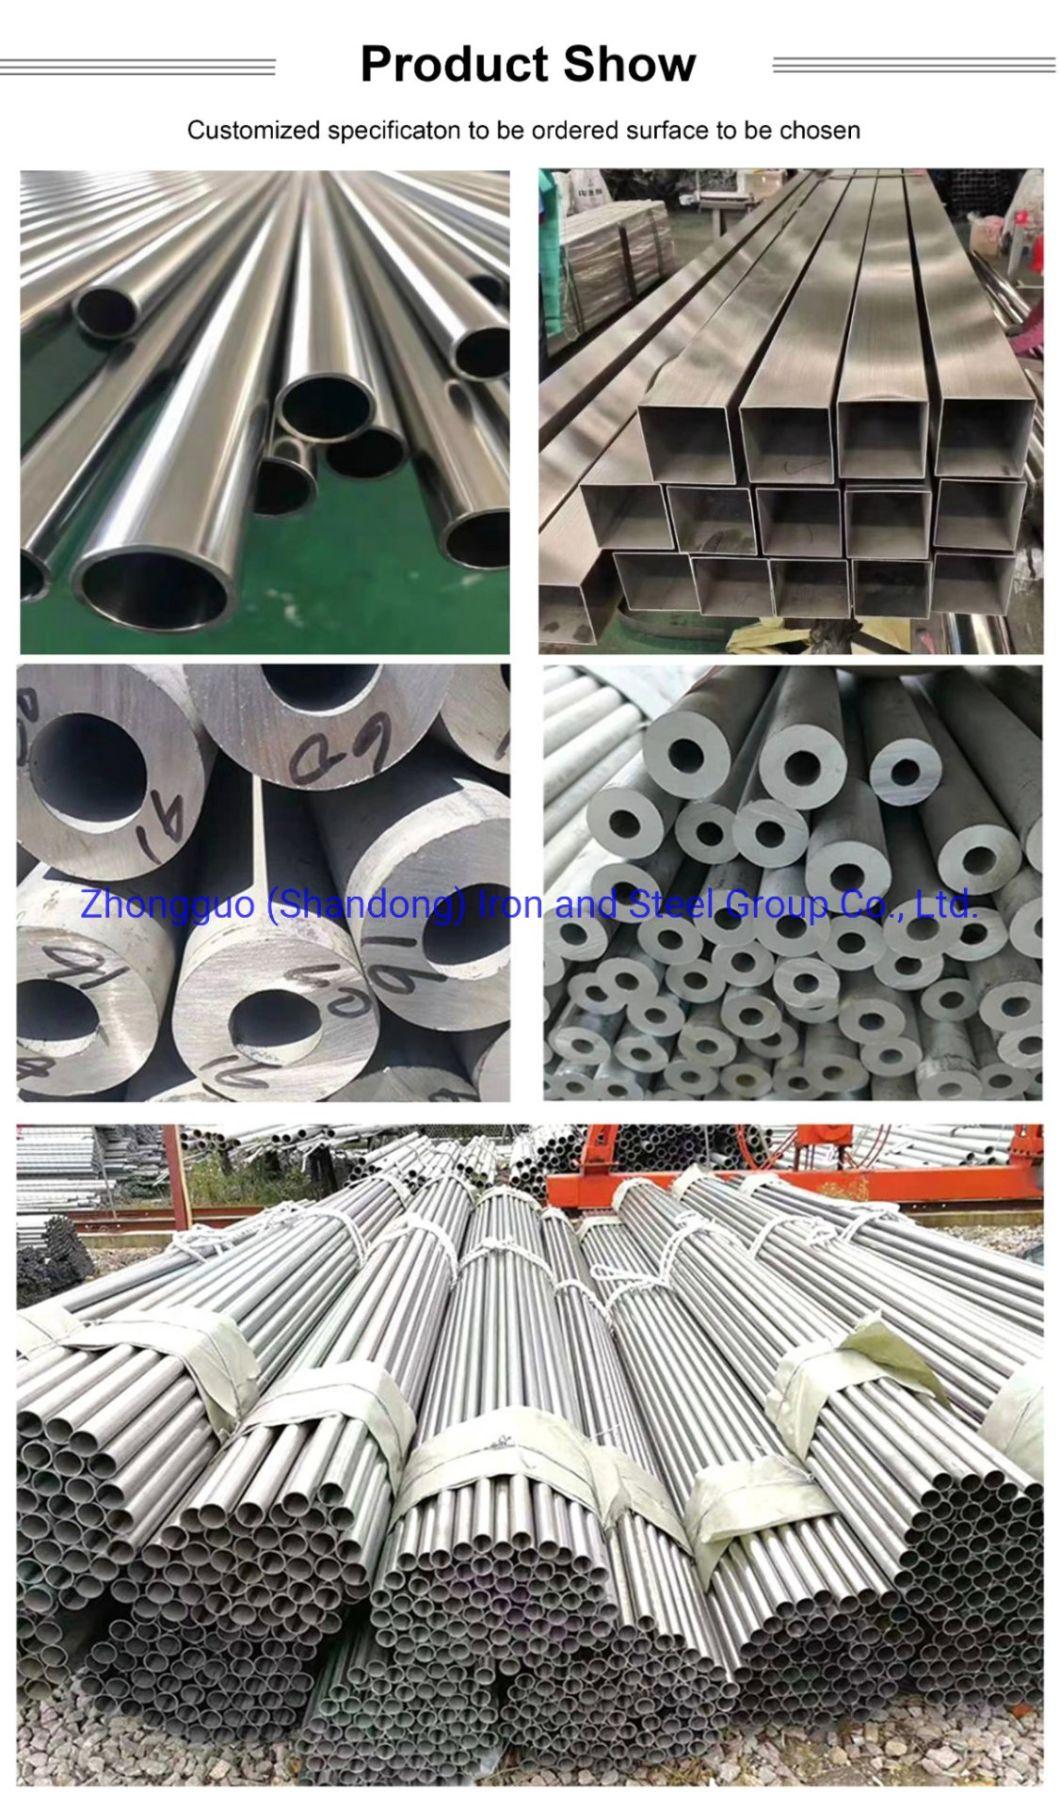 301/302/303 8K/No4 Cold Rolled Stainless Steel Tube/Pipe for Sale